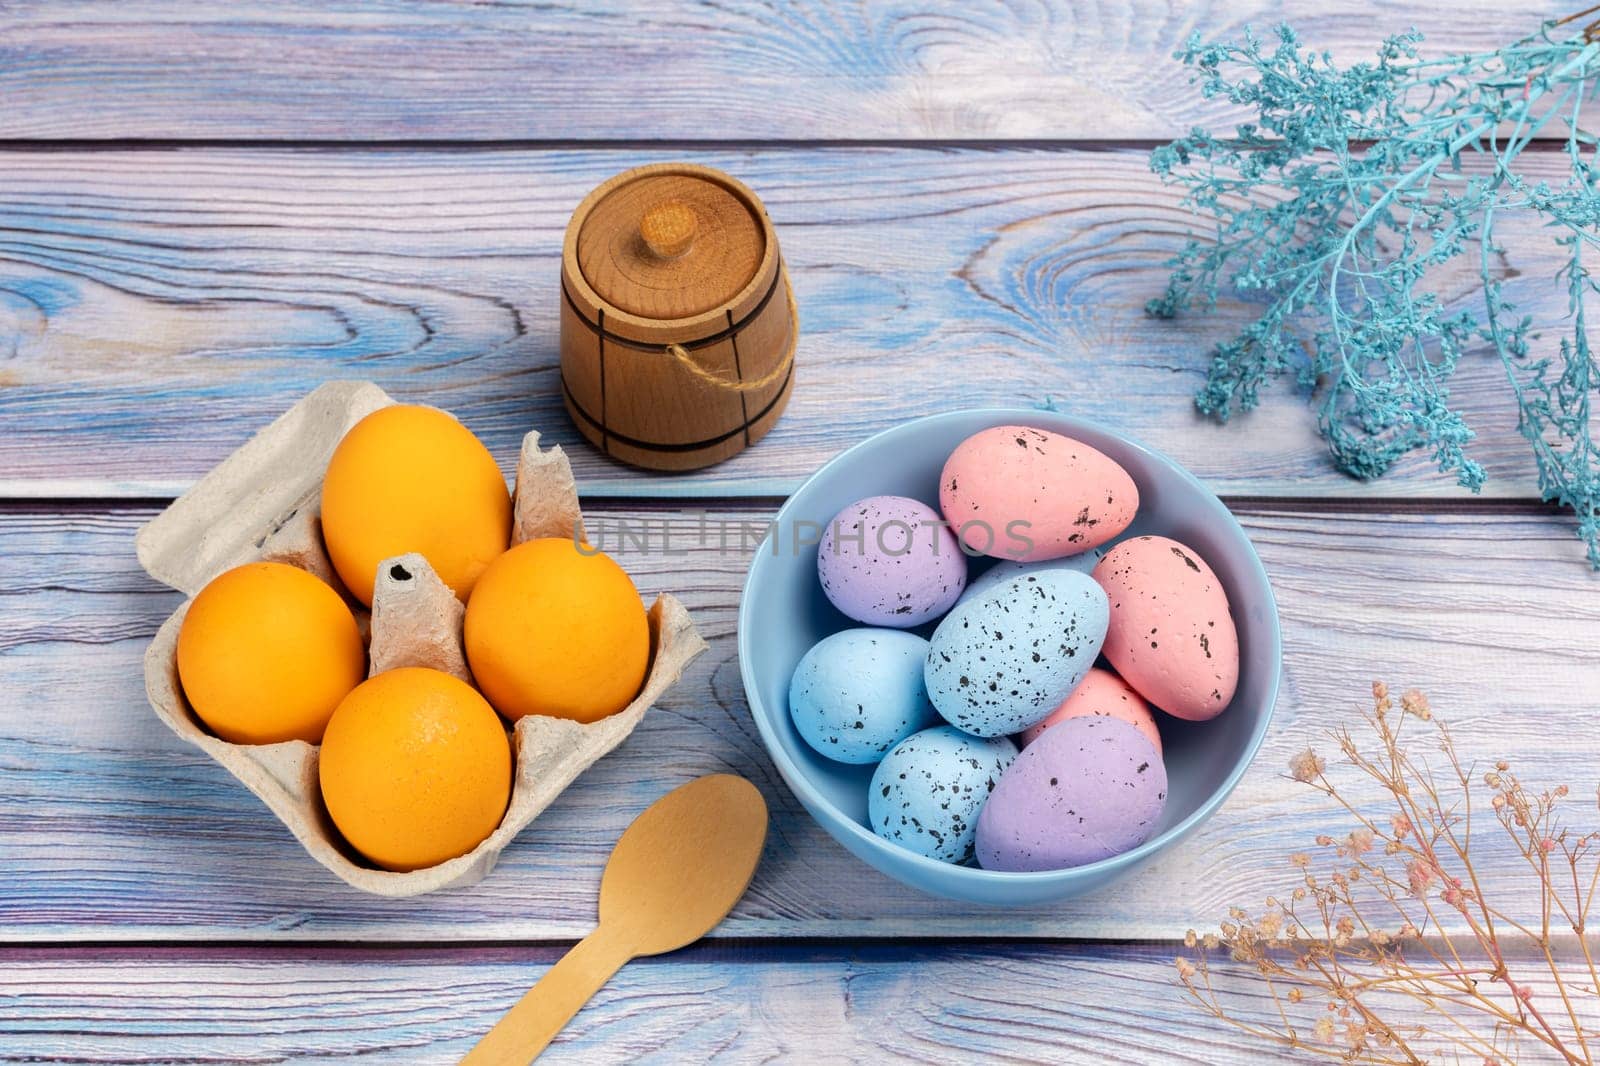 Bowl with colored Easter eggs and a cardboard box with fresh eggs, a small wooden barrel, a wooden spoon on the boards with decorative plants. Top view.